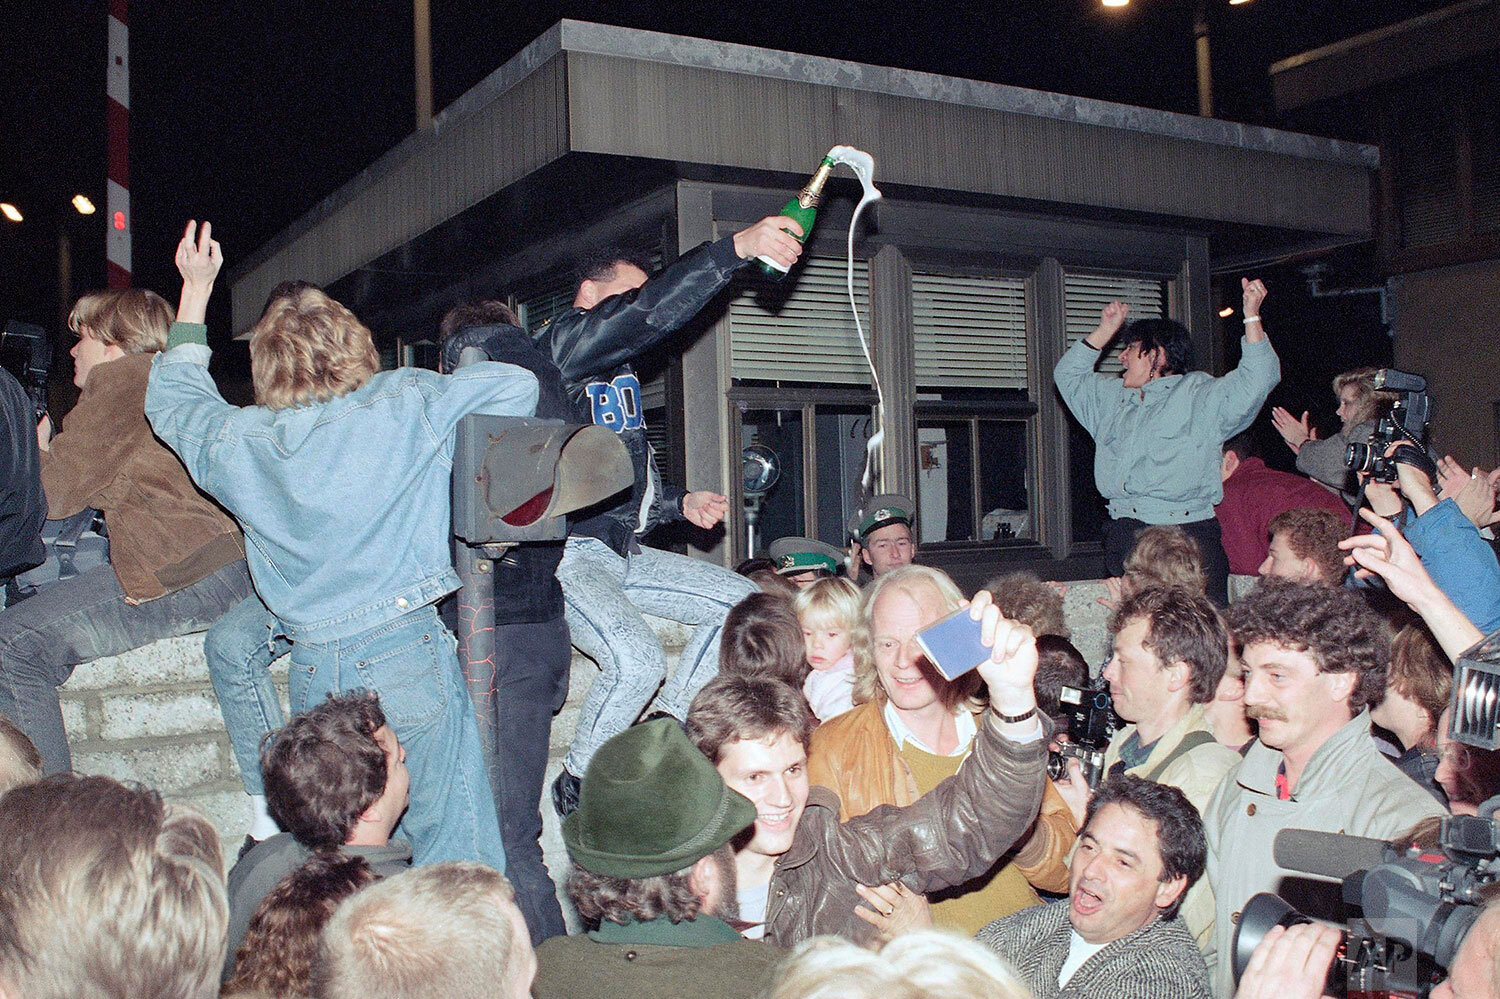  East and West Berliners celebrate in front of a control station on East Berlin territory, Nov. 10, 1989, during the opening of the borders to the West following the announcement by the East German government that the border to the West would be open